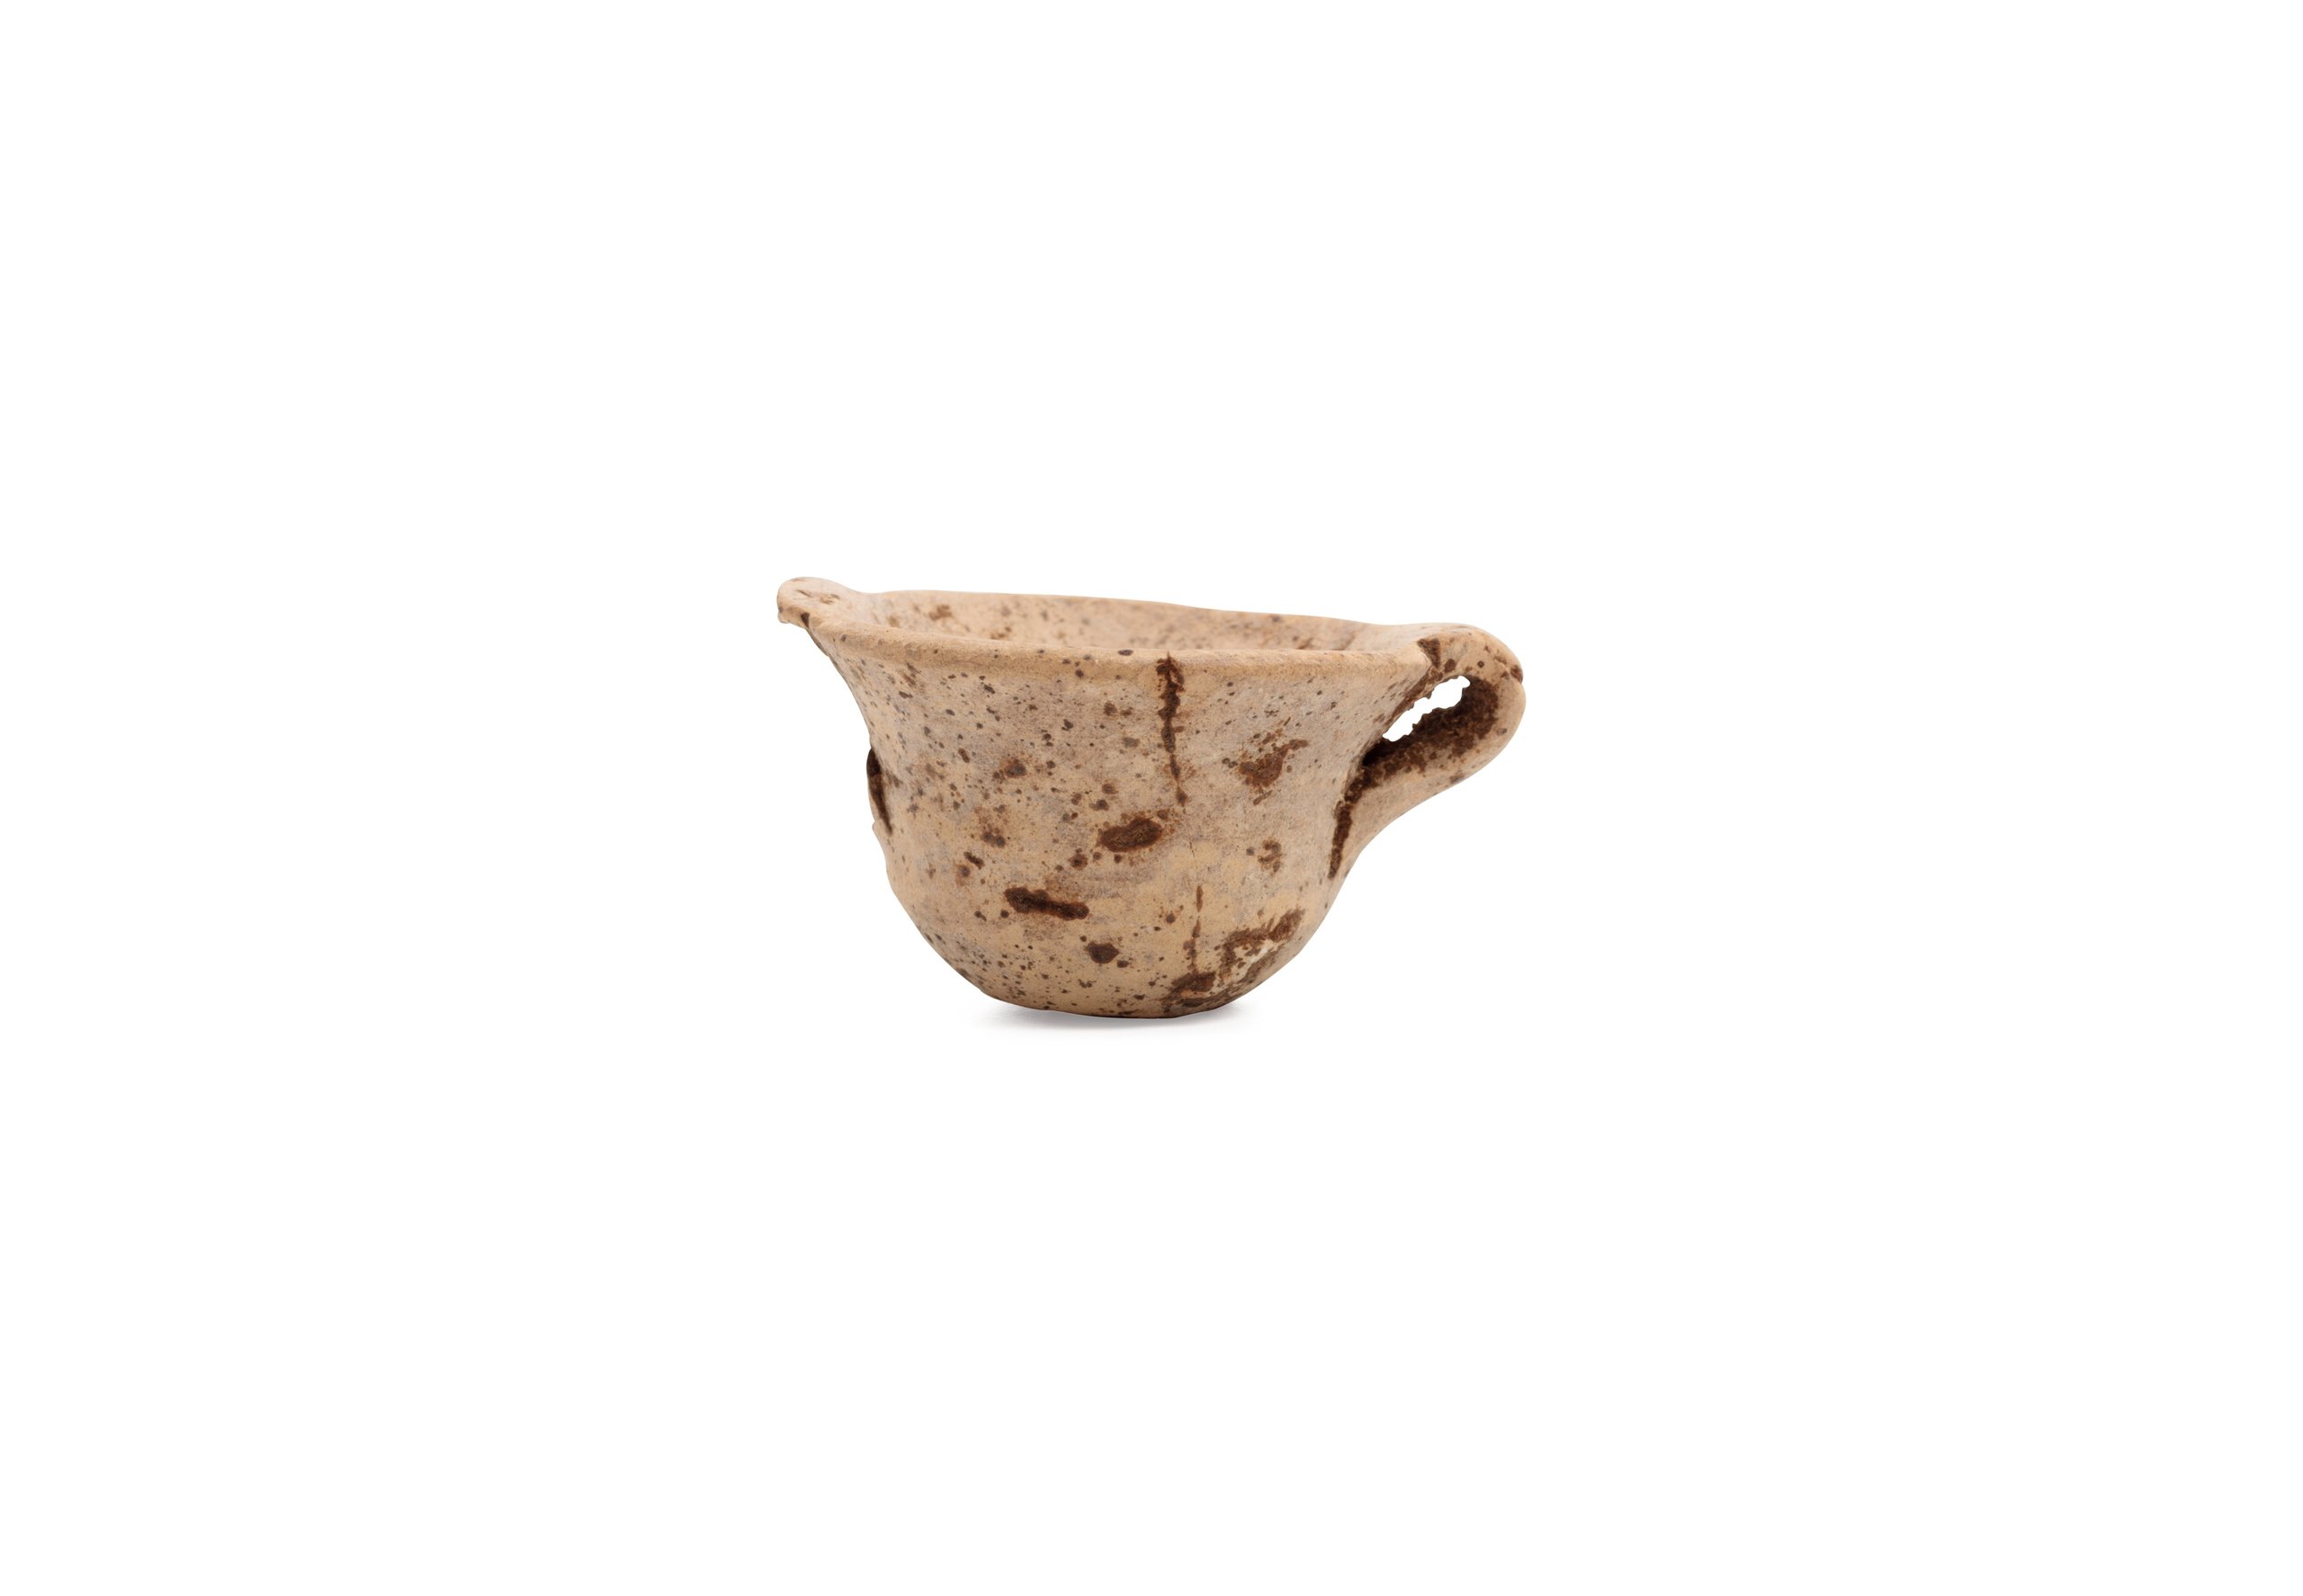 Ceramic cup from Egypt or Palestine